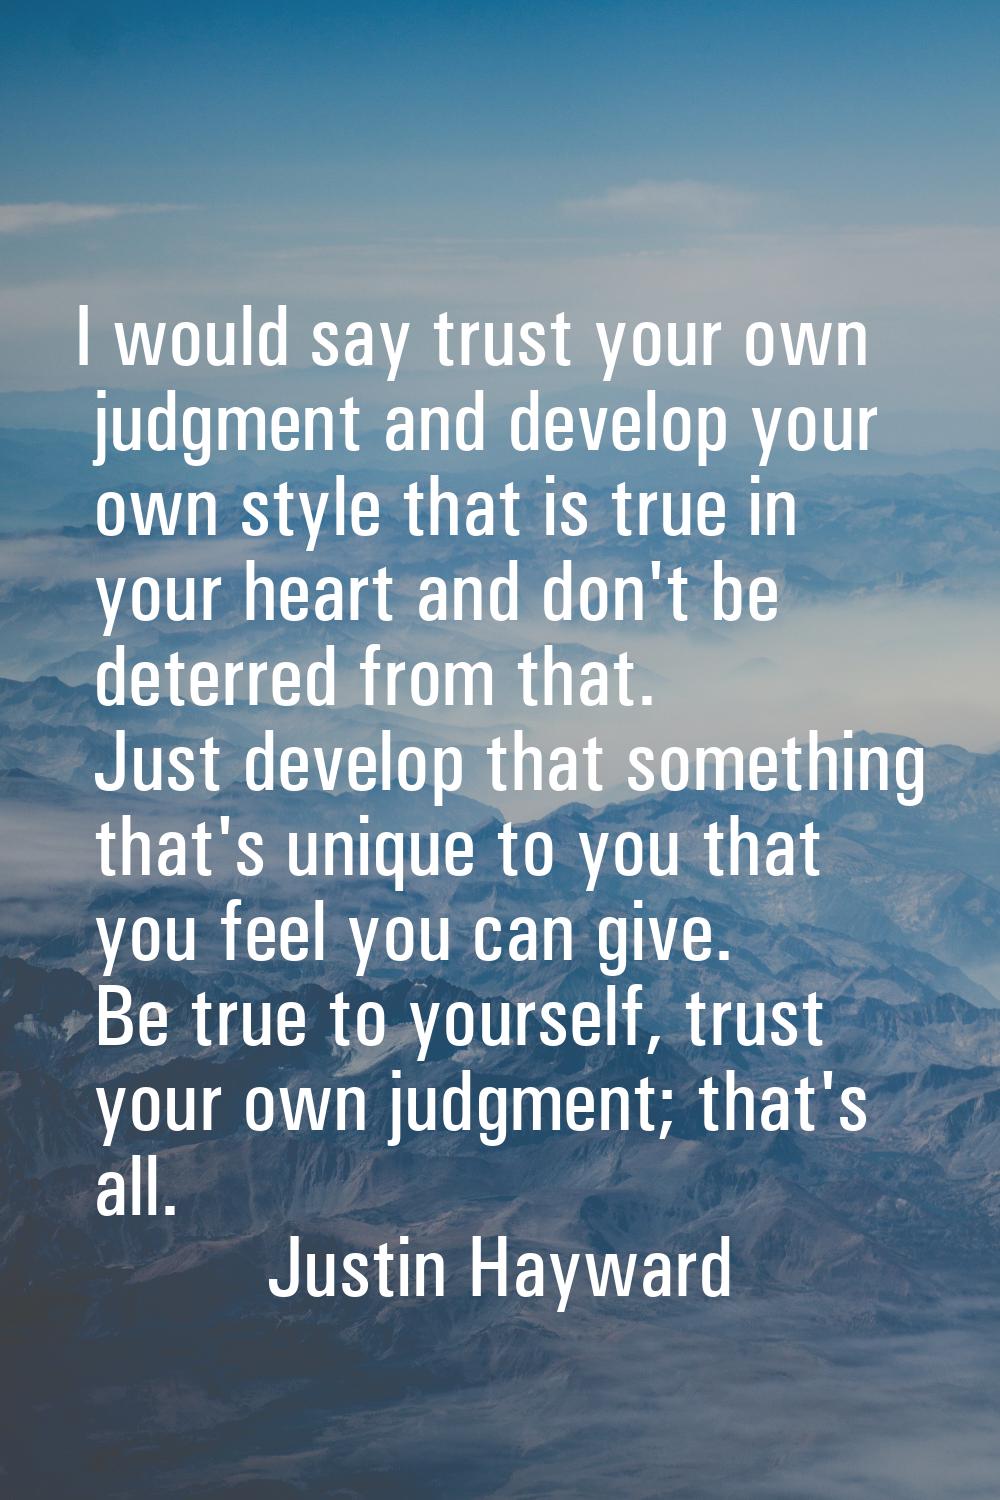 I would say trust your own judgment and develop your own style that is true in your heart and don't